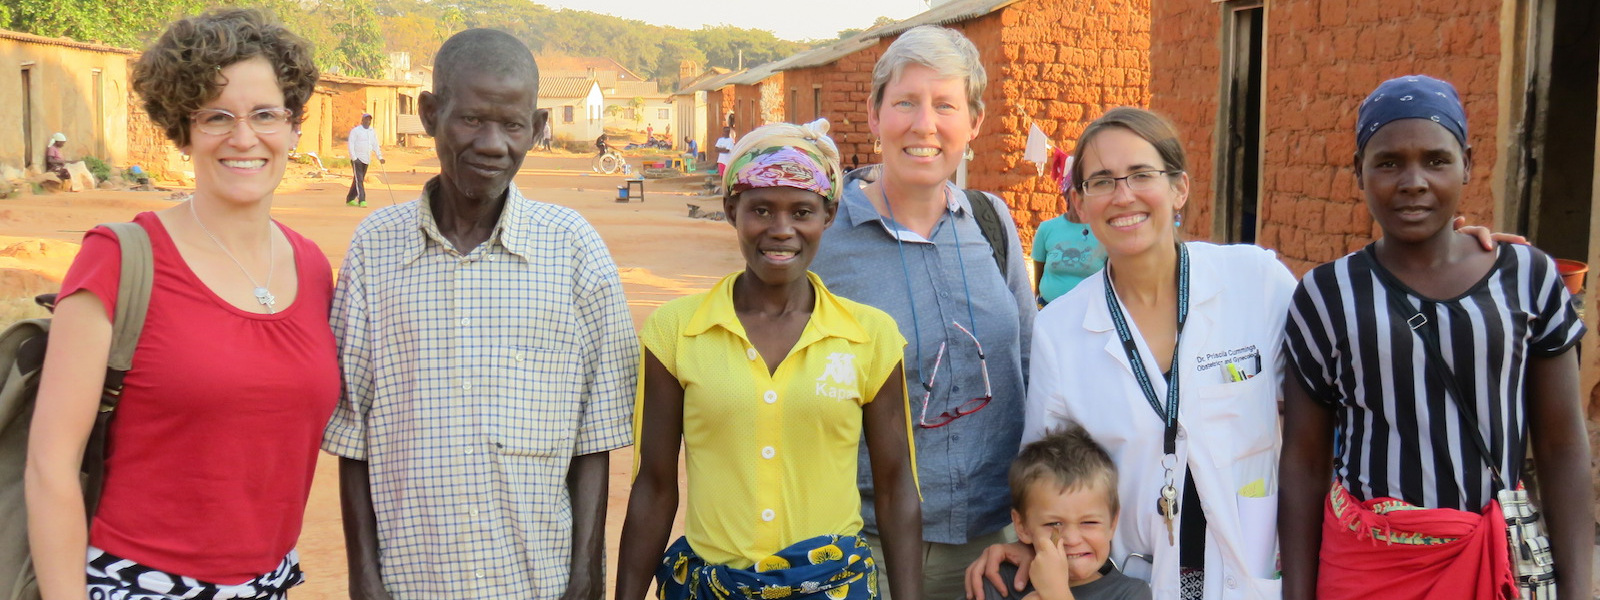 Hope for Our Sisters staff with clients in Angolan village